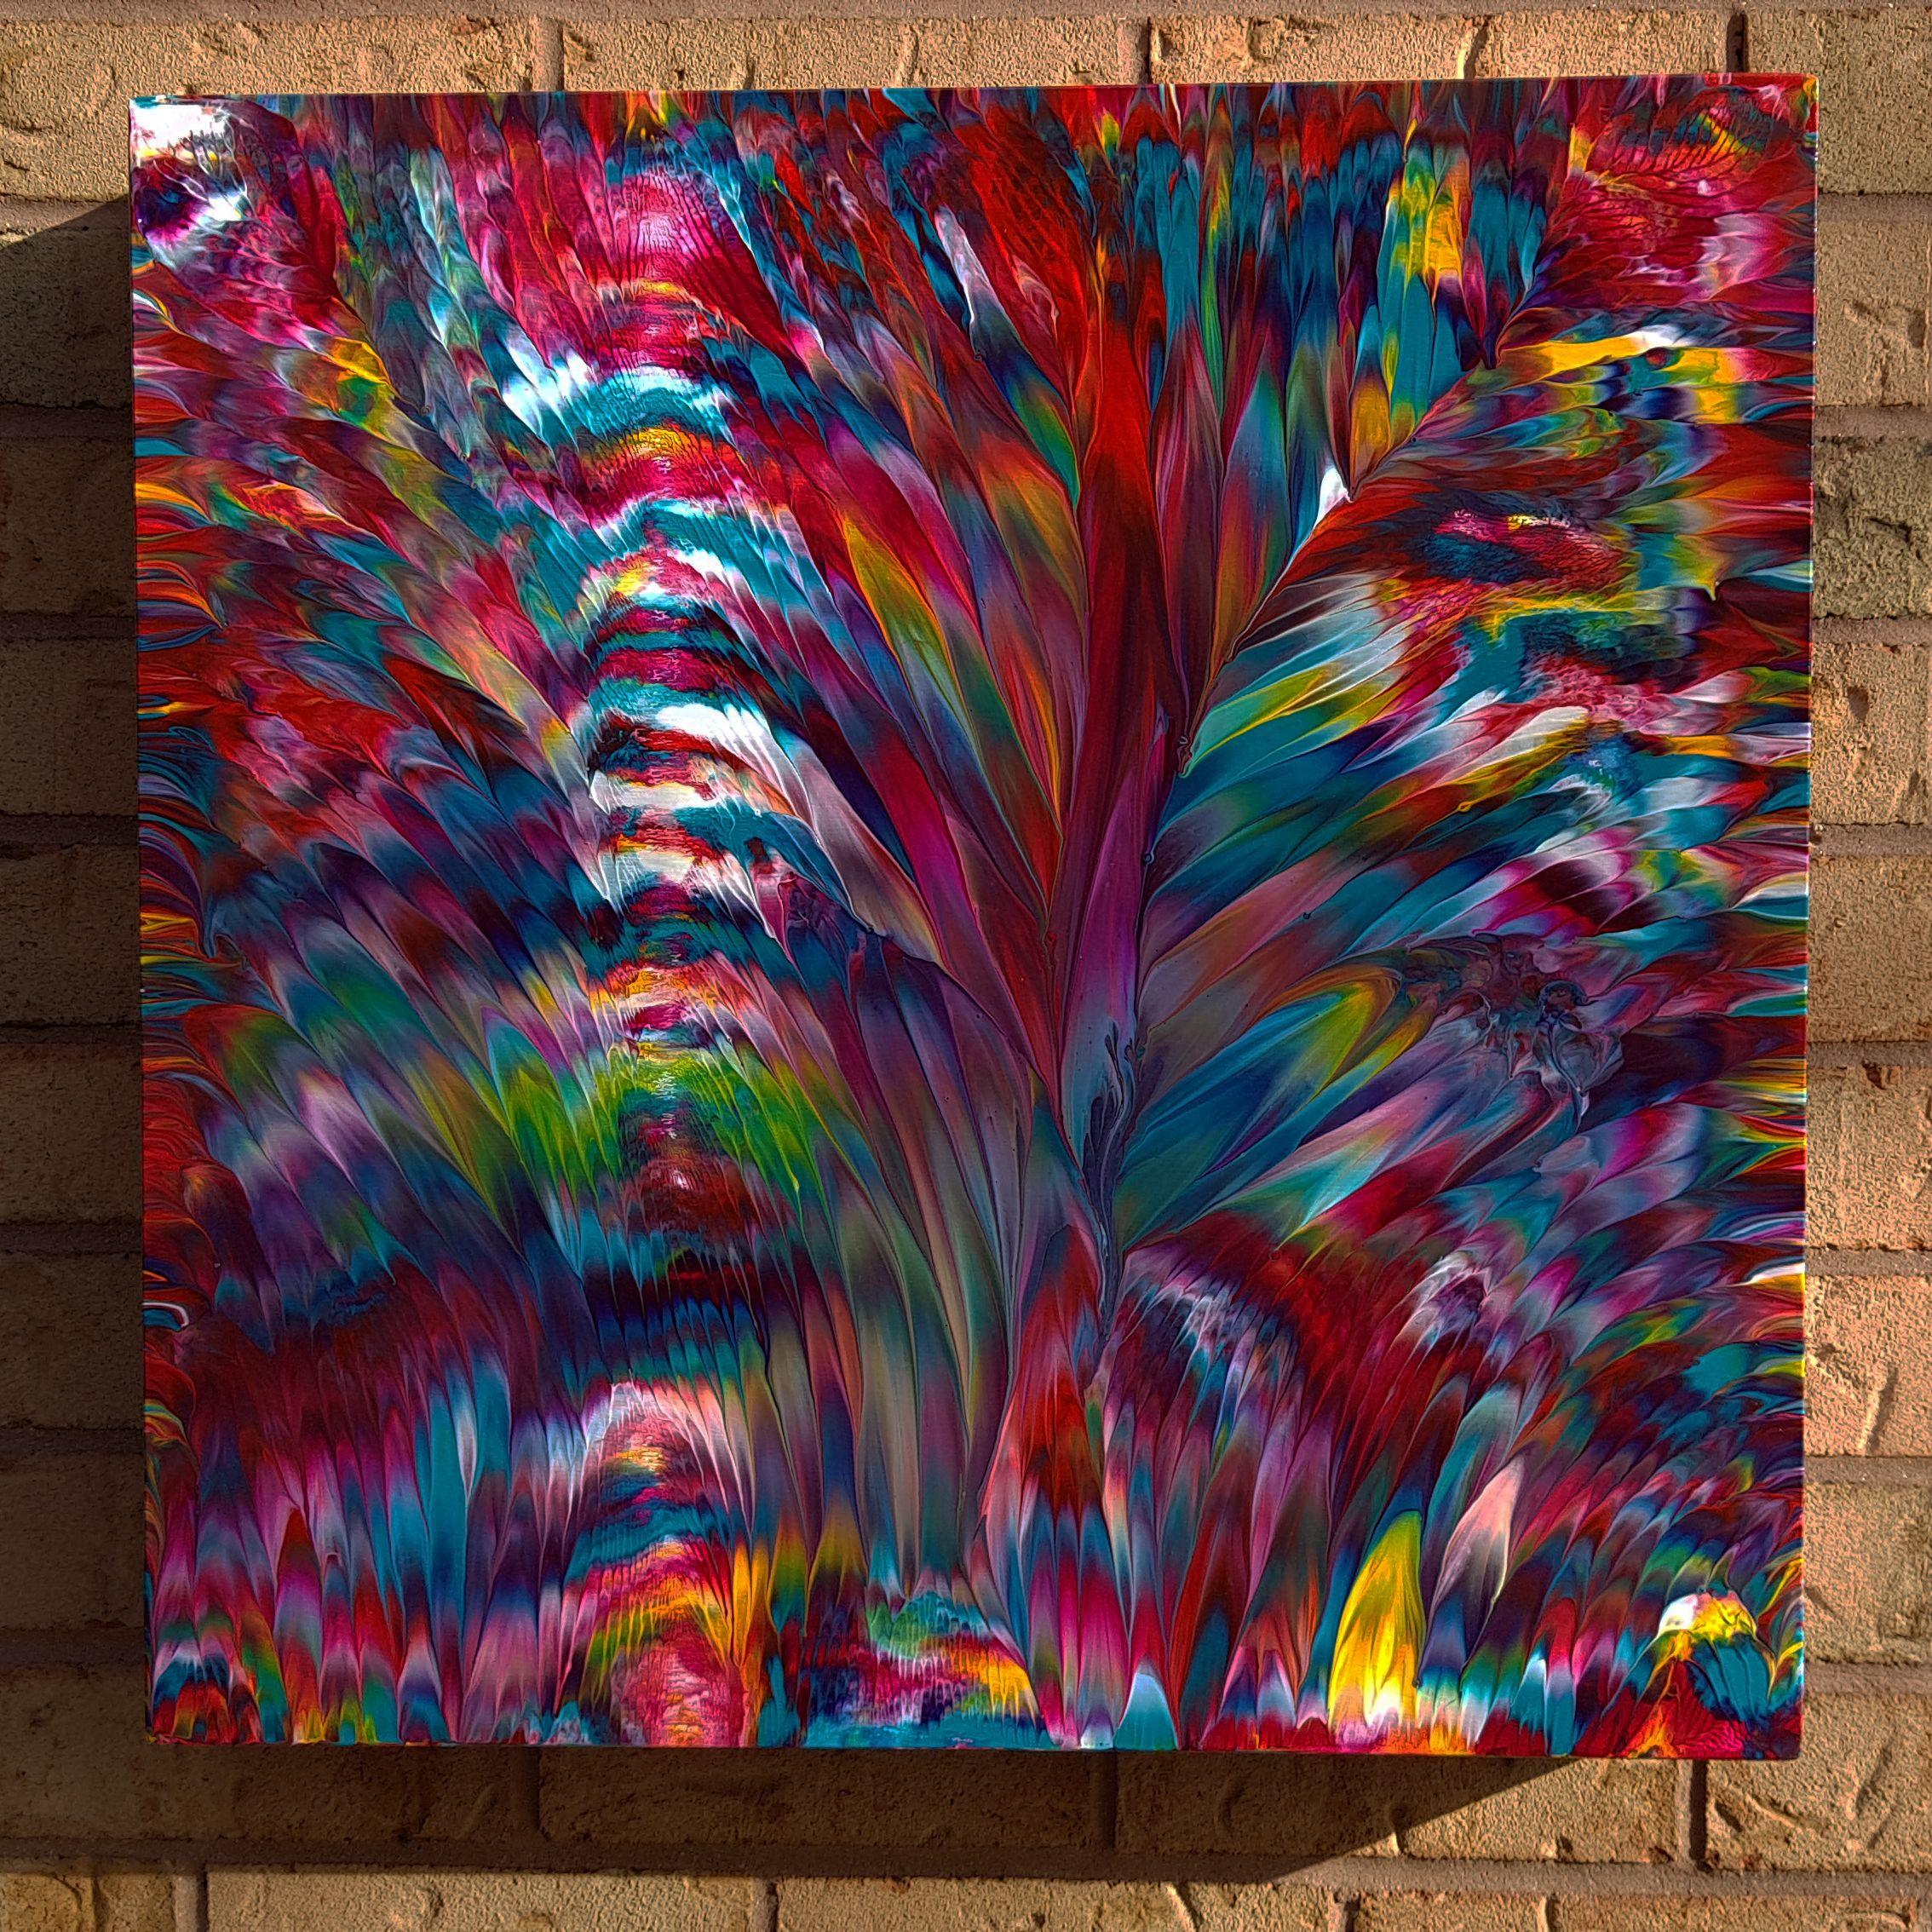 Inside Joseph's Dreamcoat IV is an abstract expressionism painting with liveliness, vibrant colours, unique texture, and a high gloss finish. The vibrant pinks and fuchsias contrast beautifully with the turquoise and teal tones. With a custom-made,